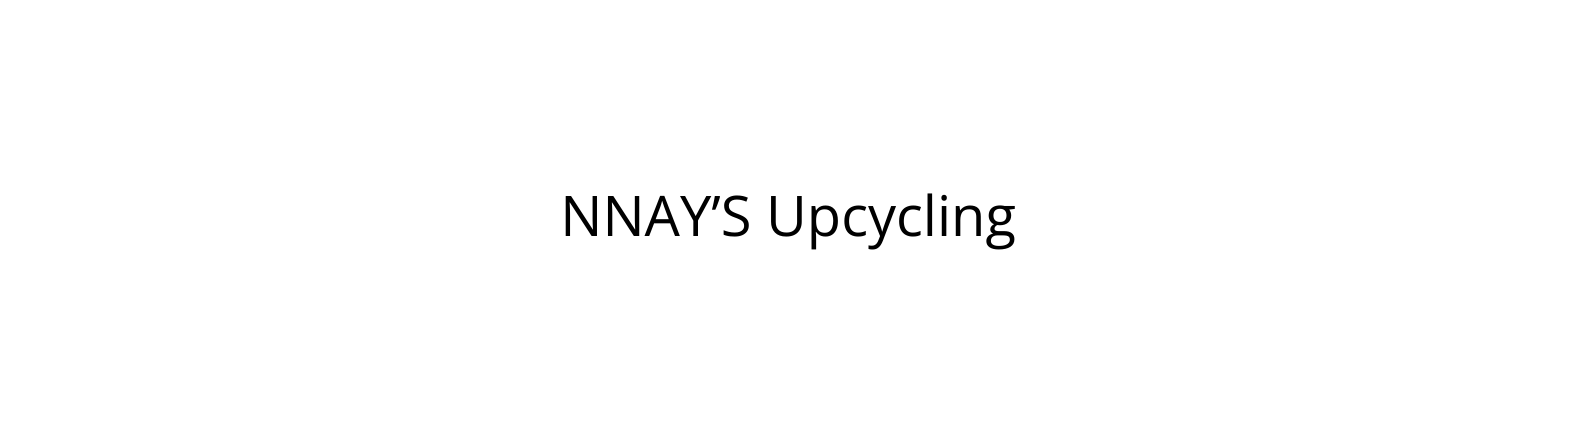 NNAY S Upcycling